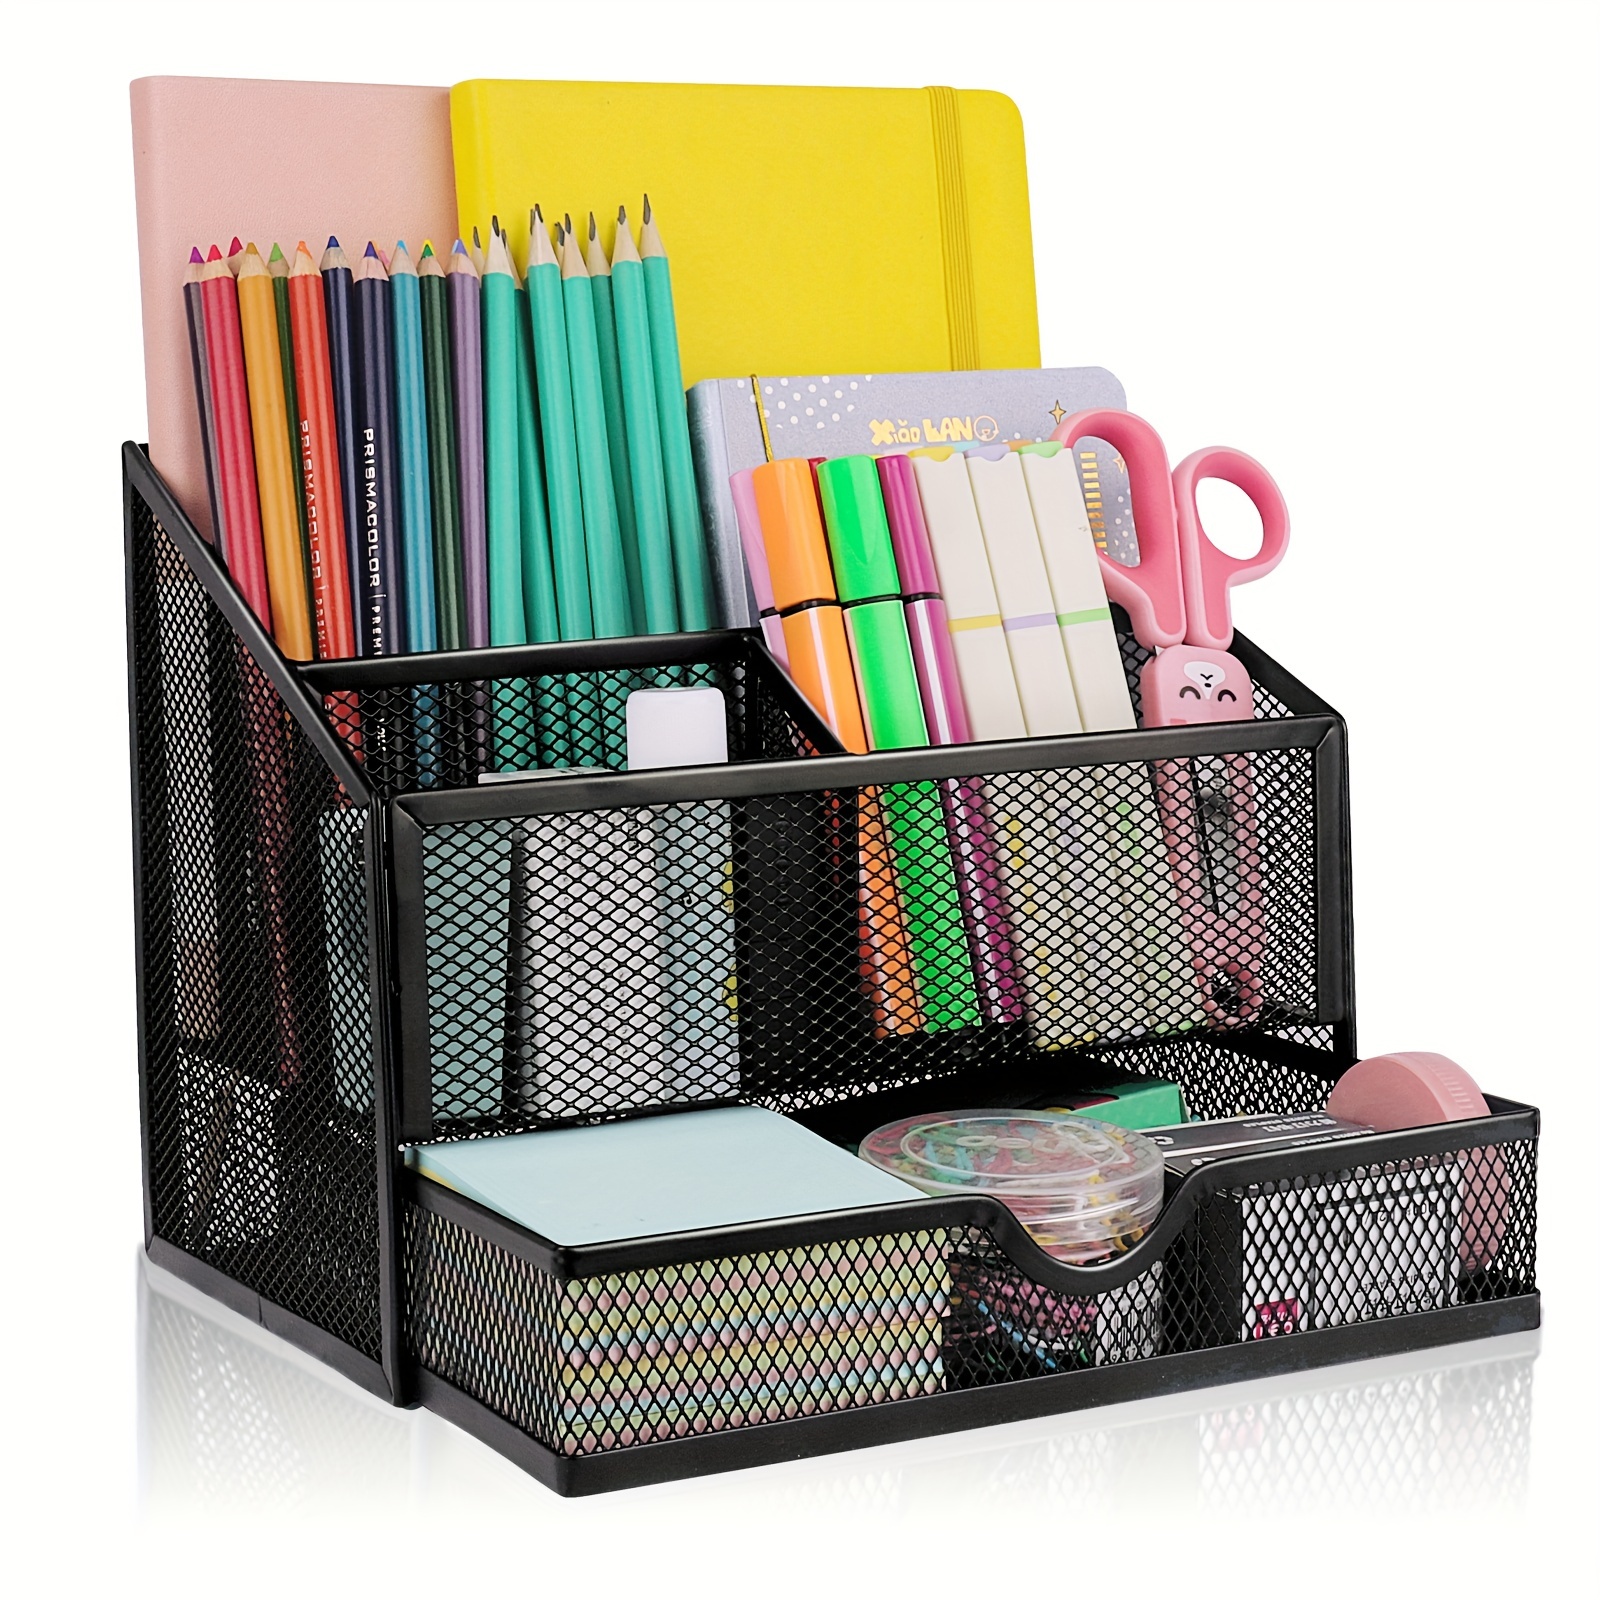 Comix Black Pen Holder, Mesh Office Supplies Accessories Caddy with Sticky Notes Holder, Desk Organizer for Home, Office and School